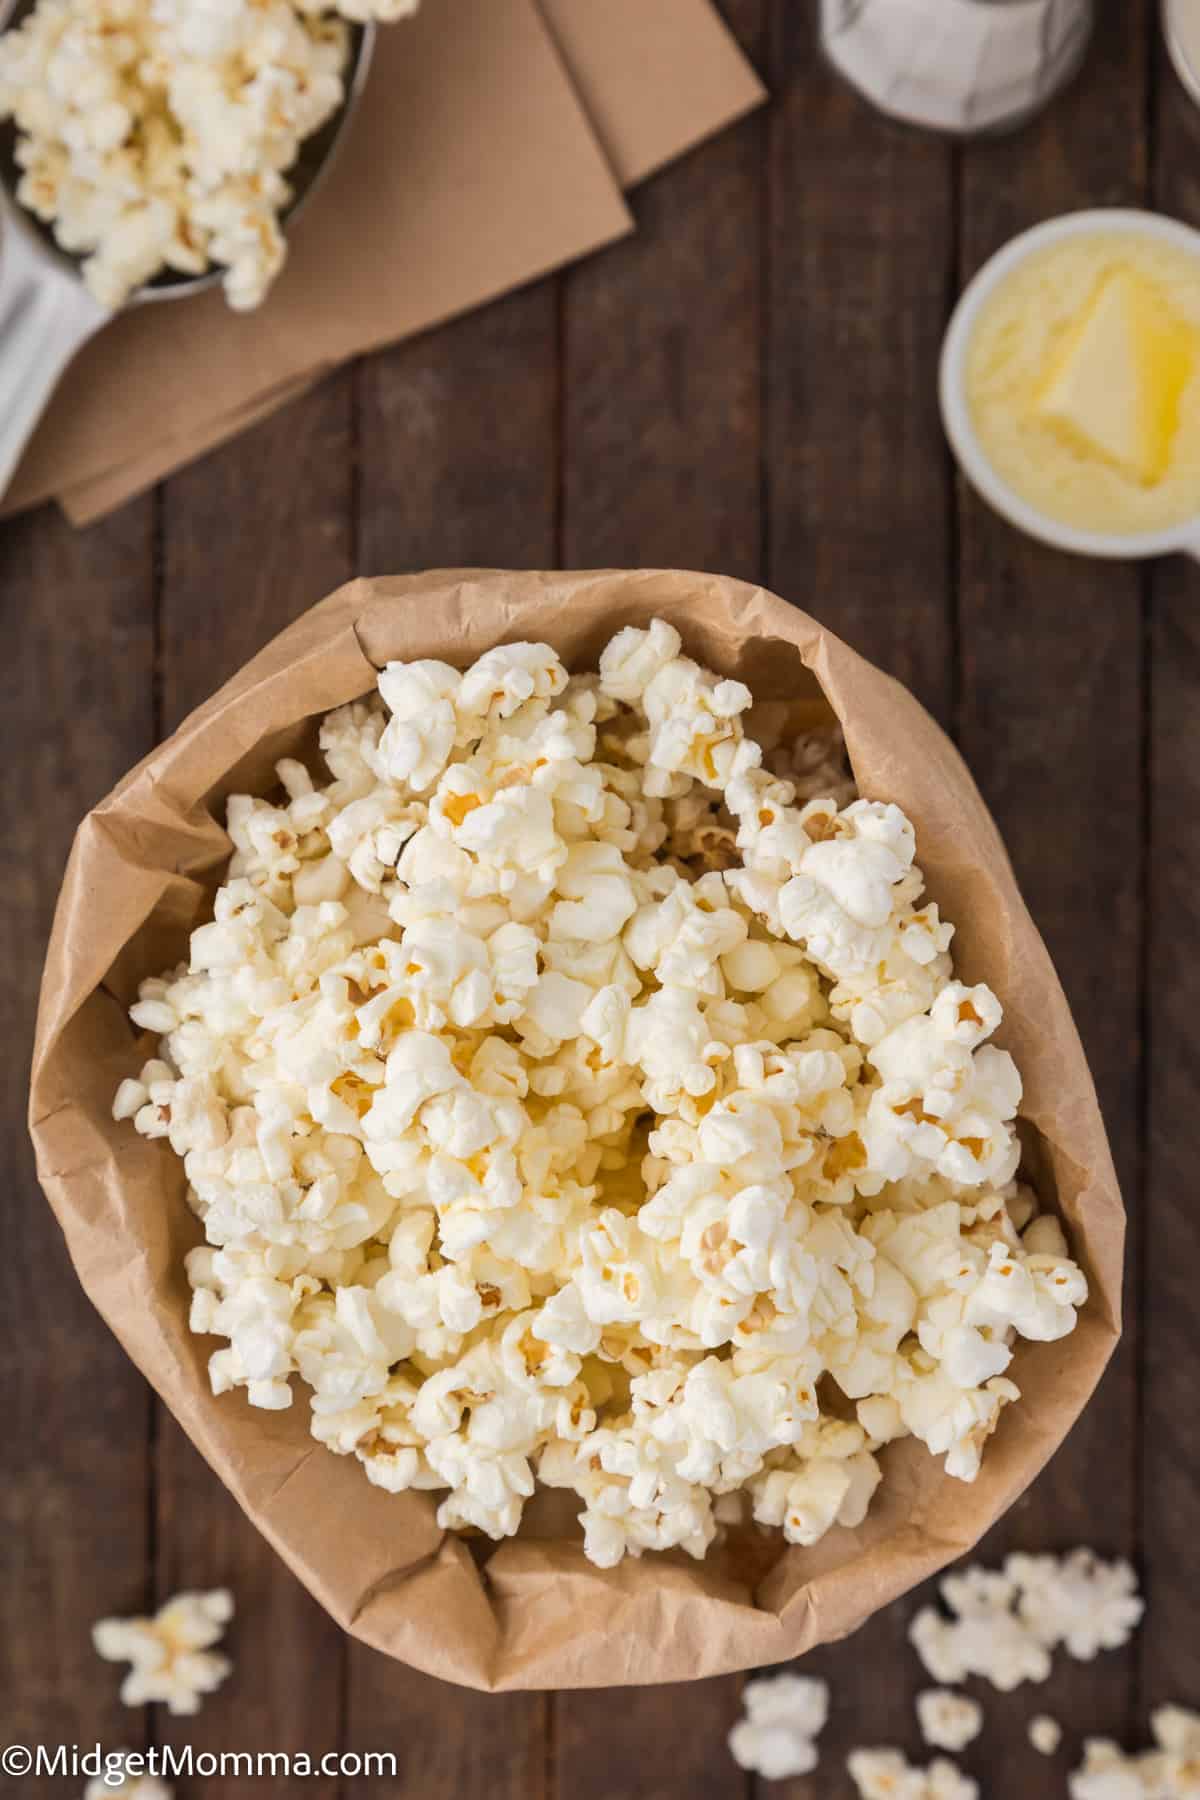 A brown paper bag filled with popcorn on a wooden surface, with more popcorn in an open cardboard box and a bowl of melted butter nearby.